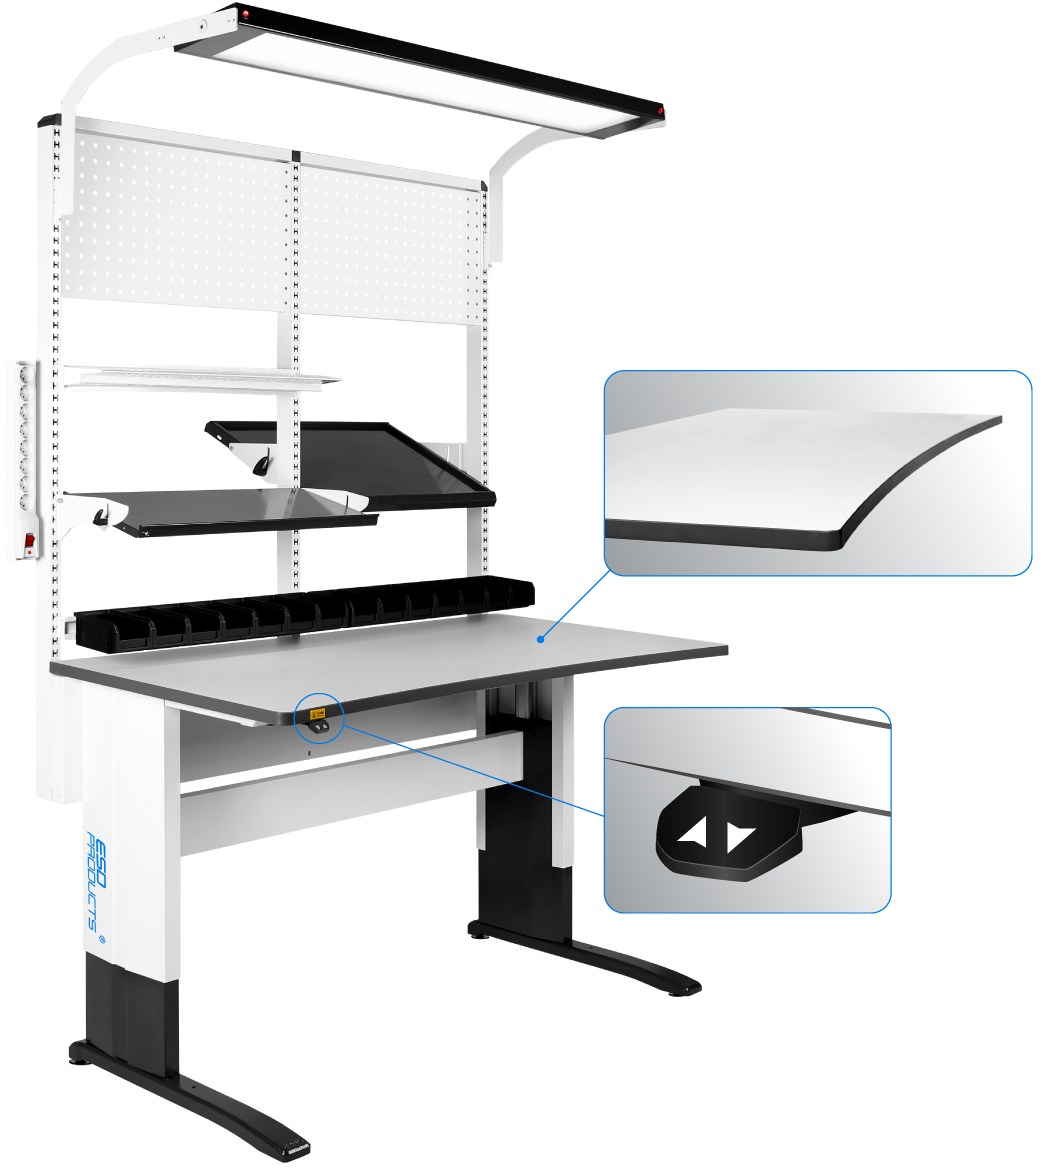 Motorized-Height-Adjustable-Workstation-ESD-Ergonomic-Table-Top-Reeco-Robert-1530-x-800-mm-ESD-Products-AES